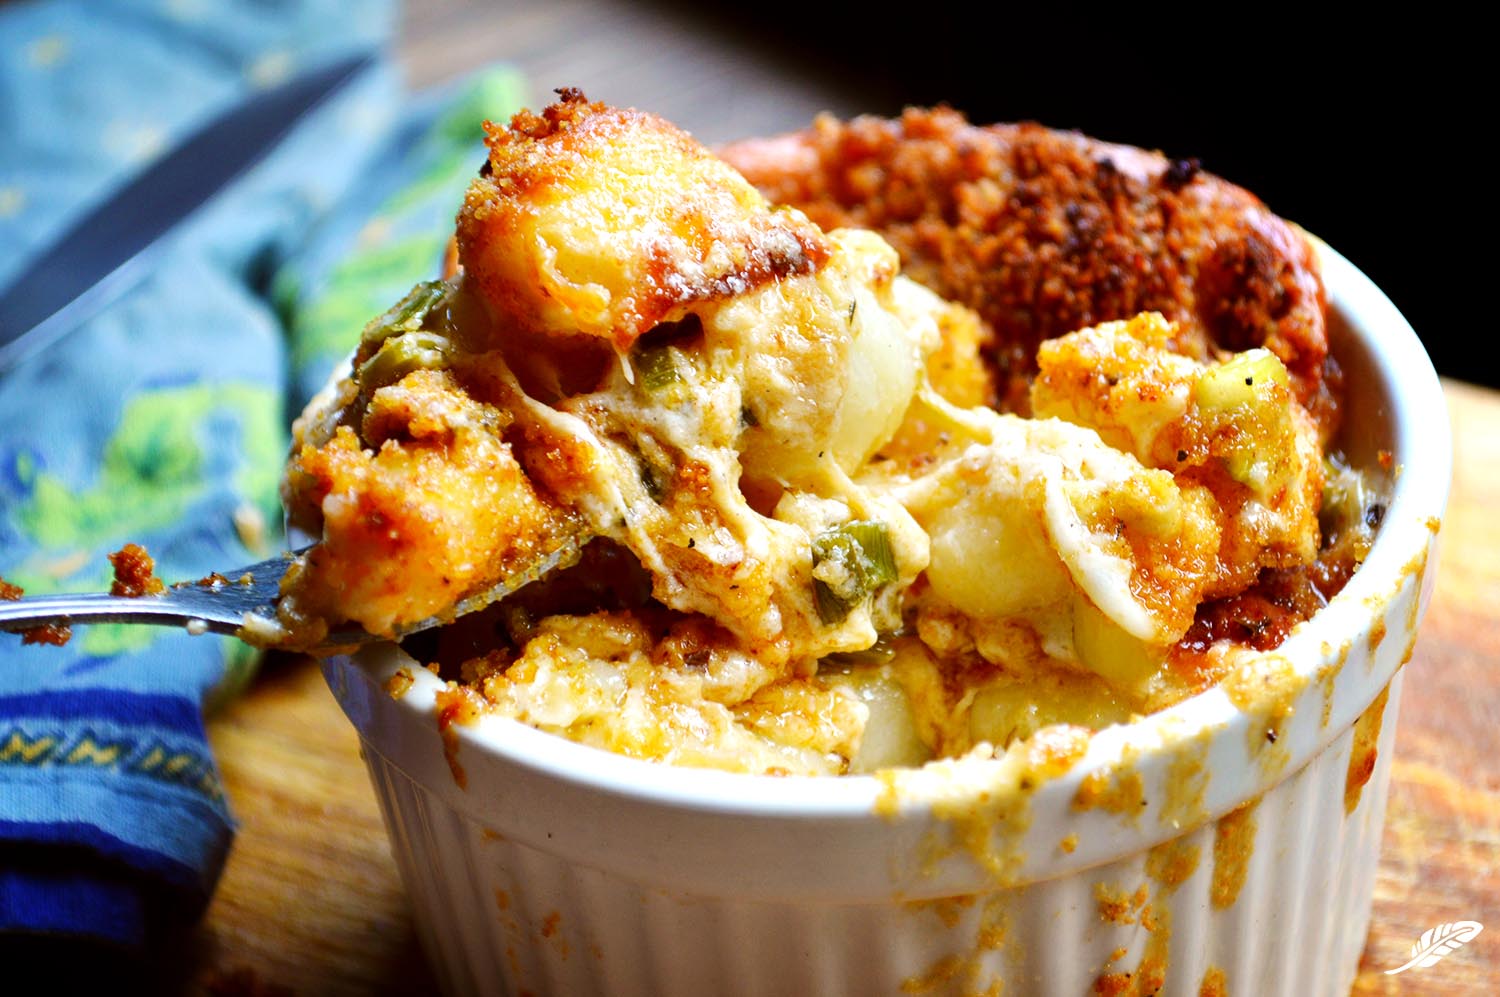 Baked Gnocchi 'N' Cheese